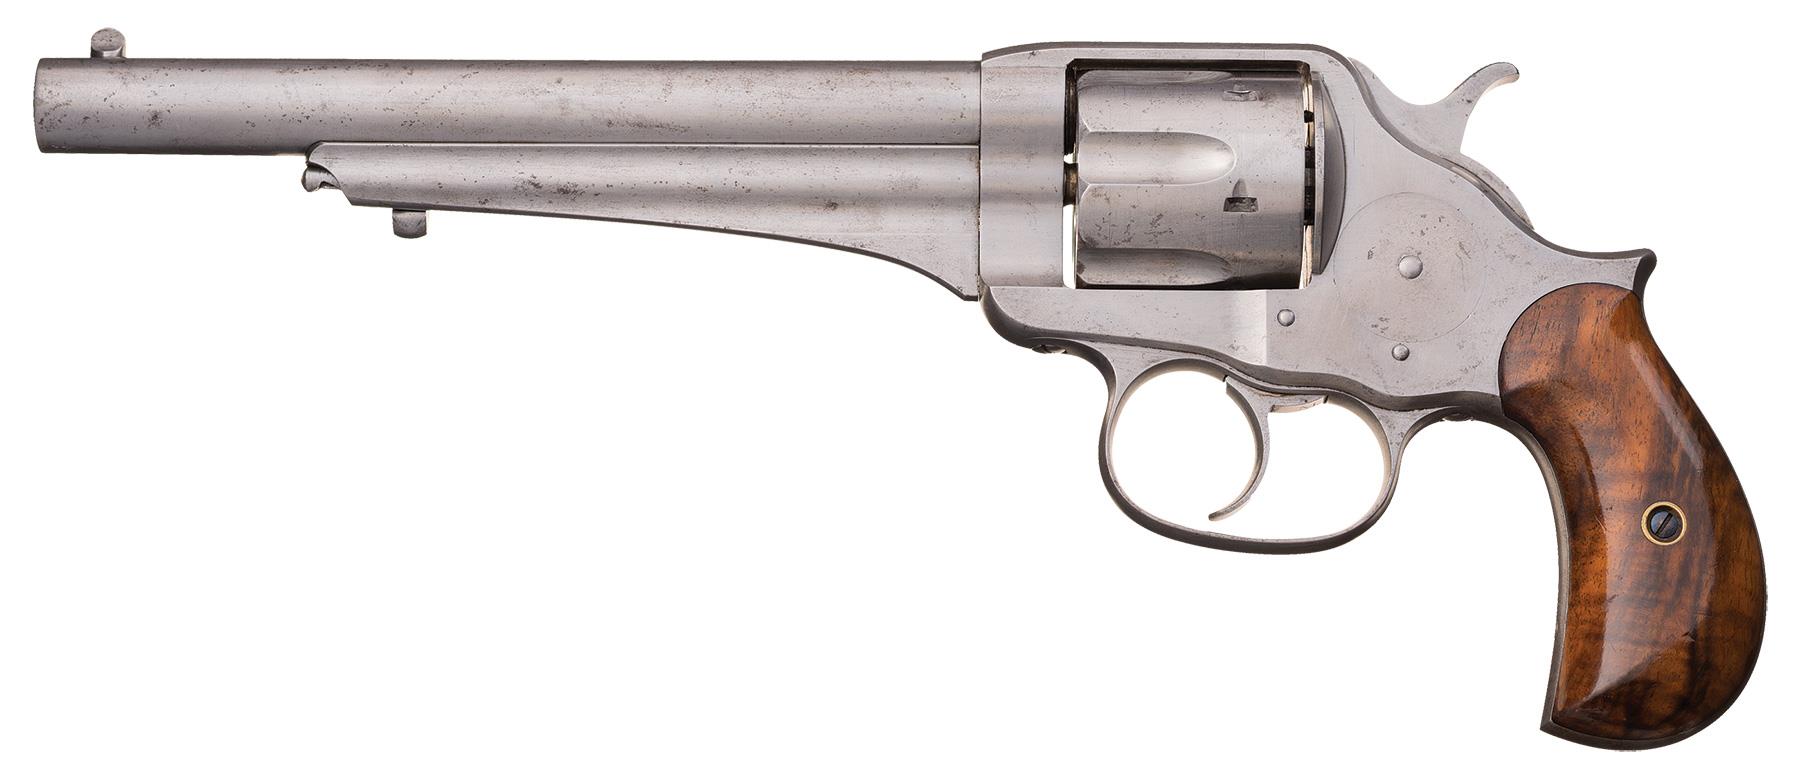 Designer Stephen Wood held the patent on the solid frame for a revolver. William Mason had been recruited from Colt. Between them the revolver they designed was a purposeful and sturdy double action that would have held its own in the Wild West.